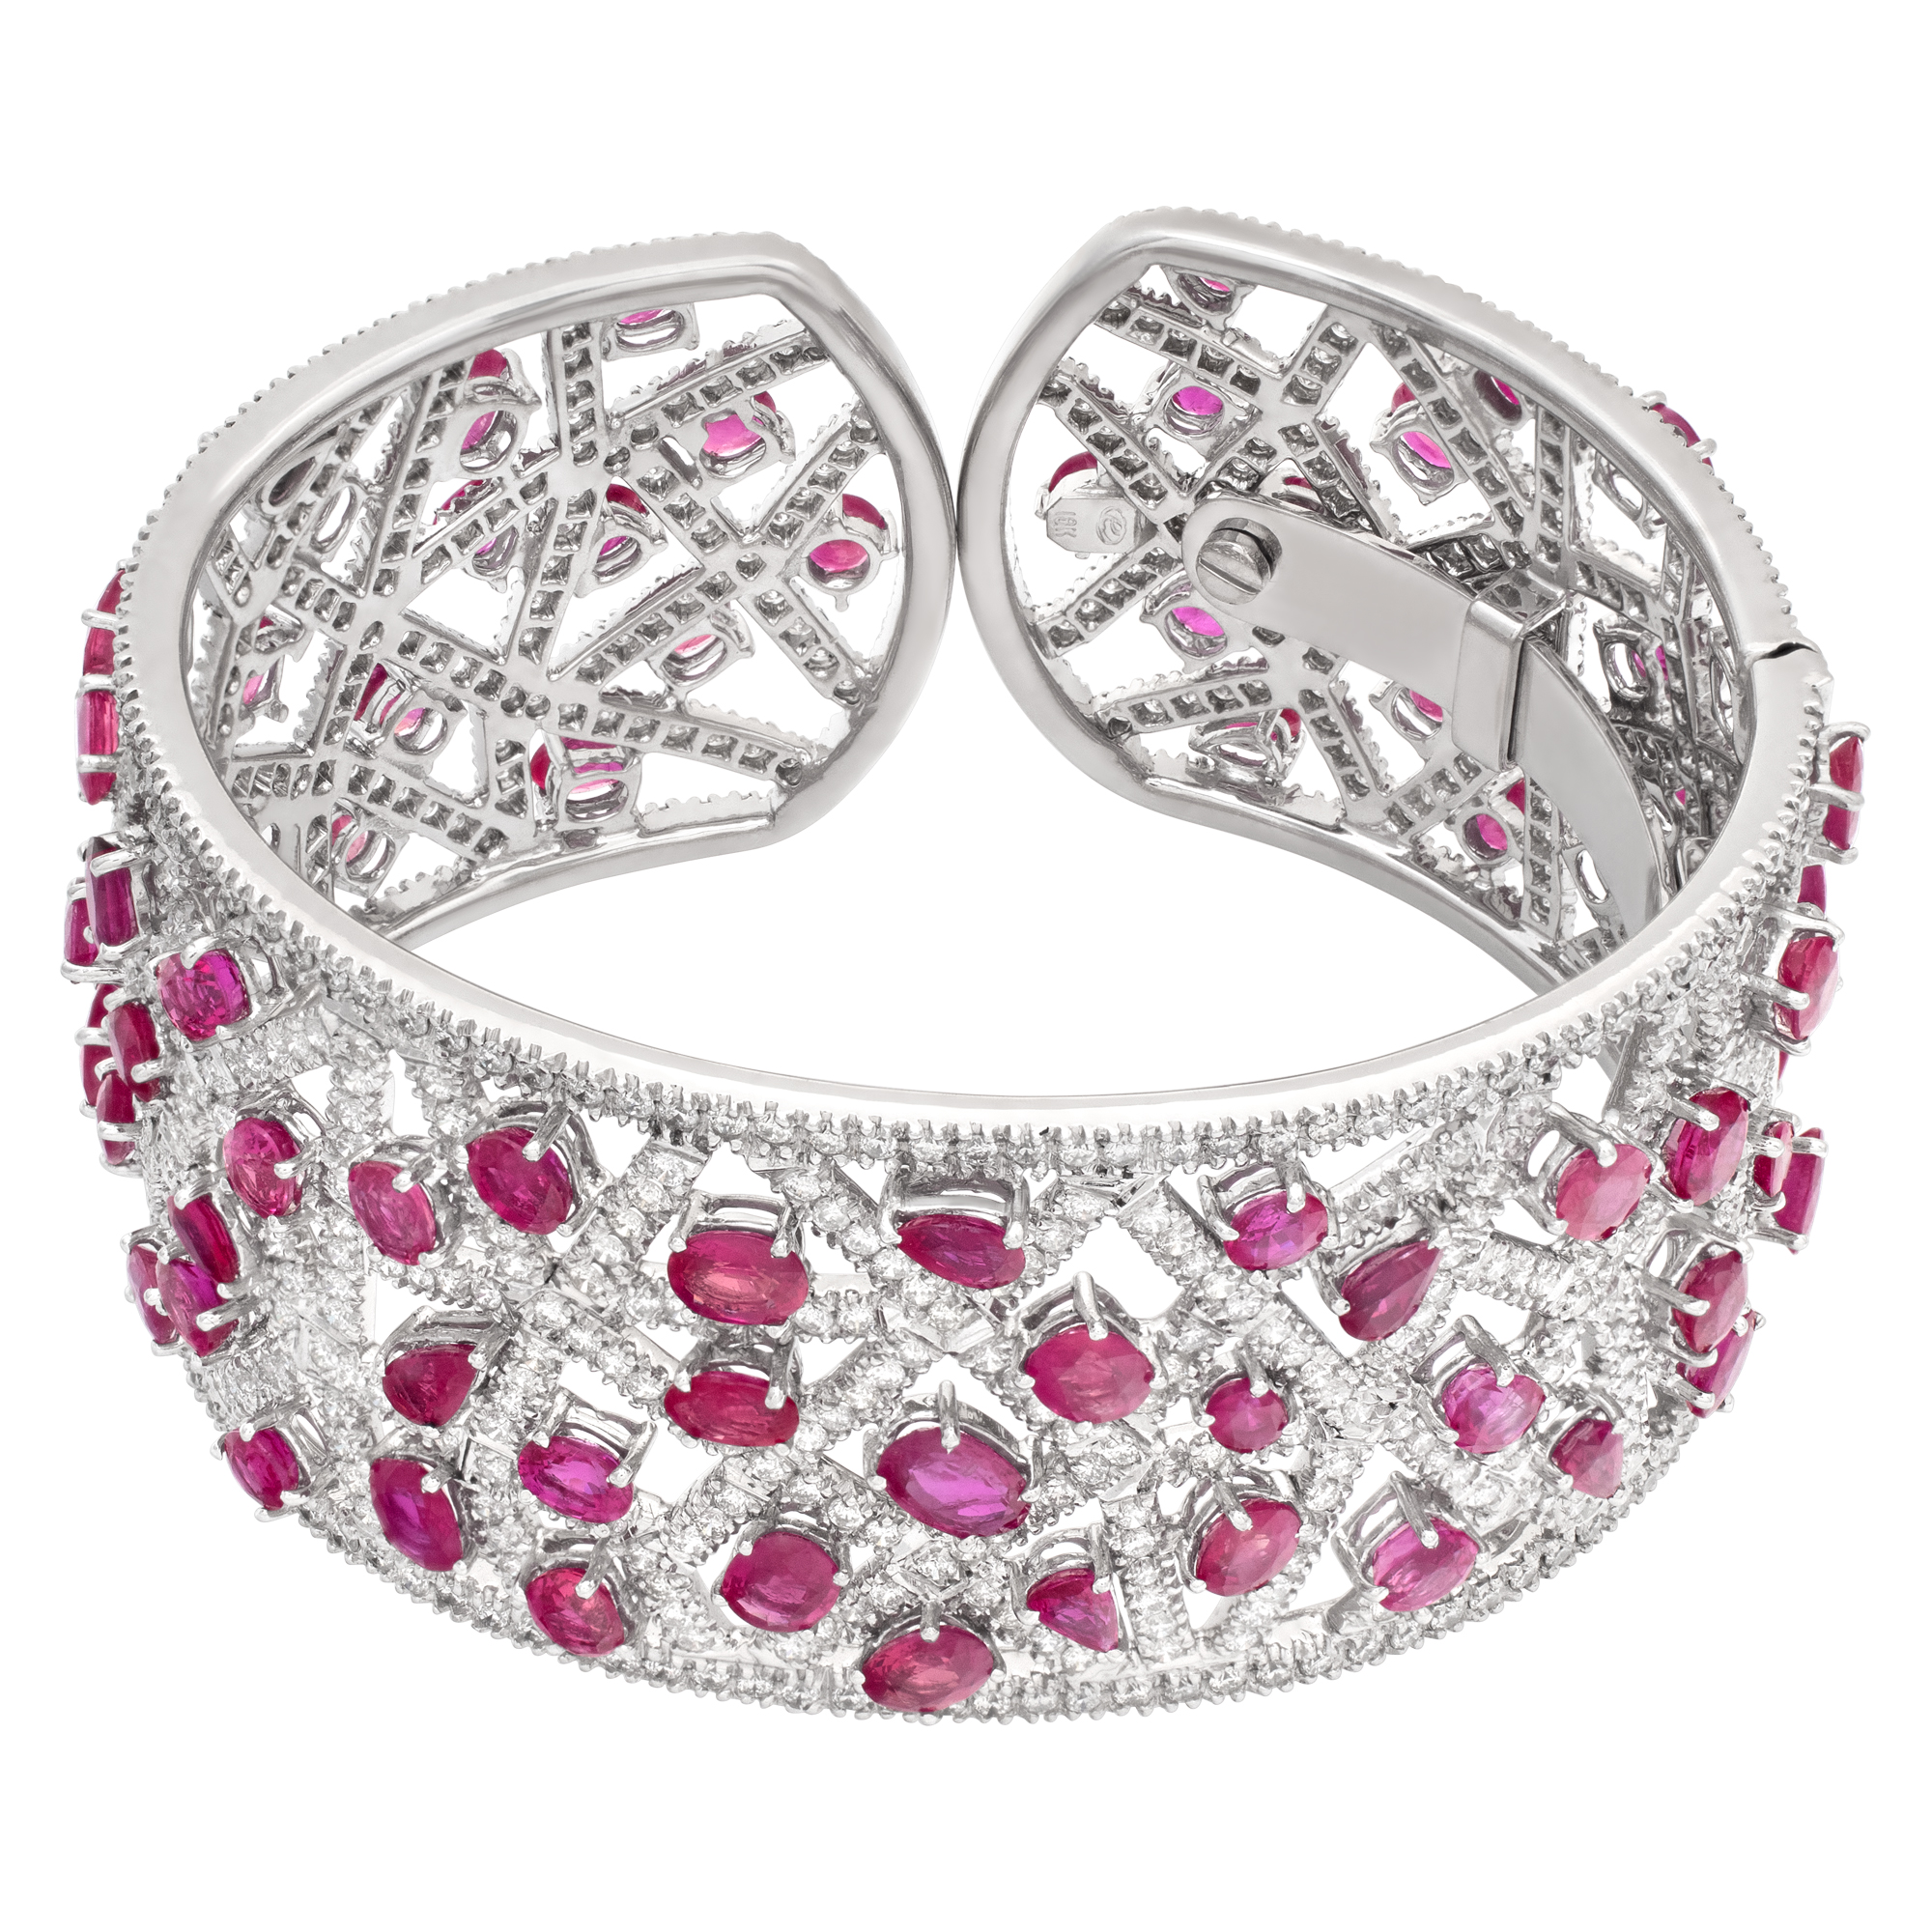 Cuff in 18k white gold with diamonds and rubies